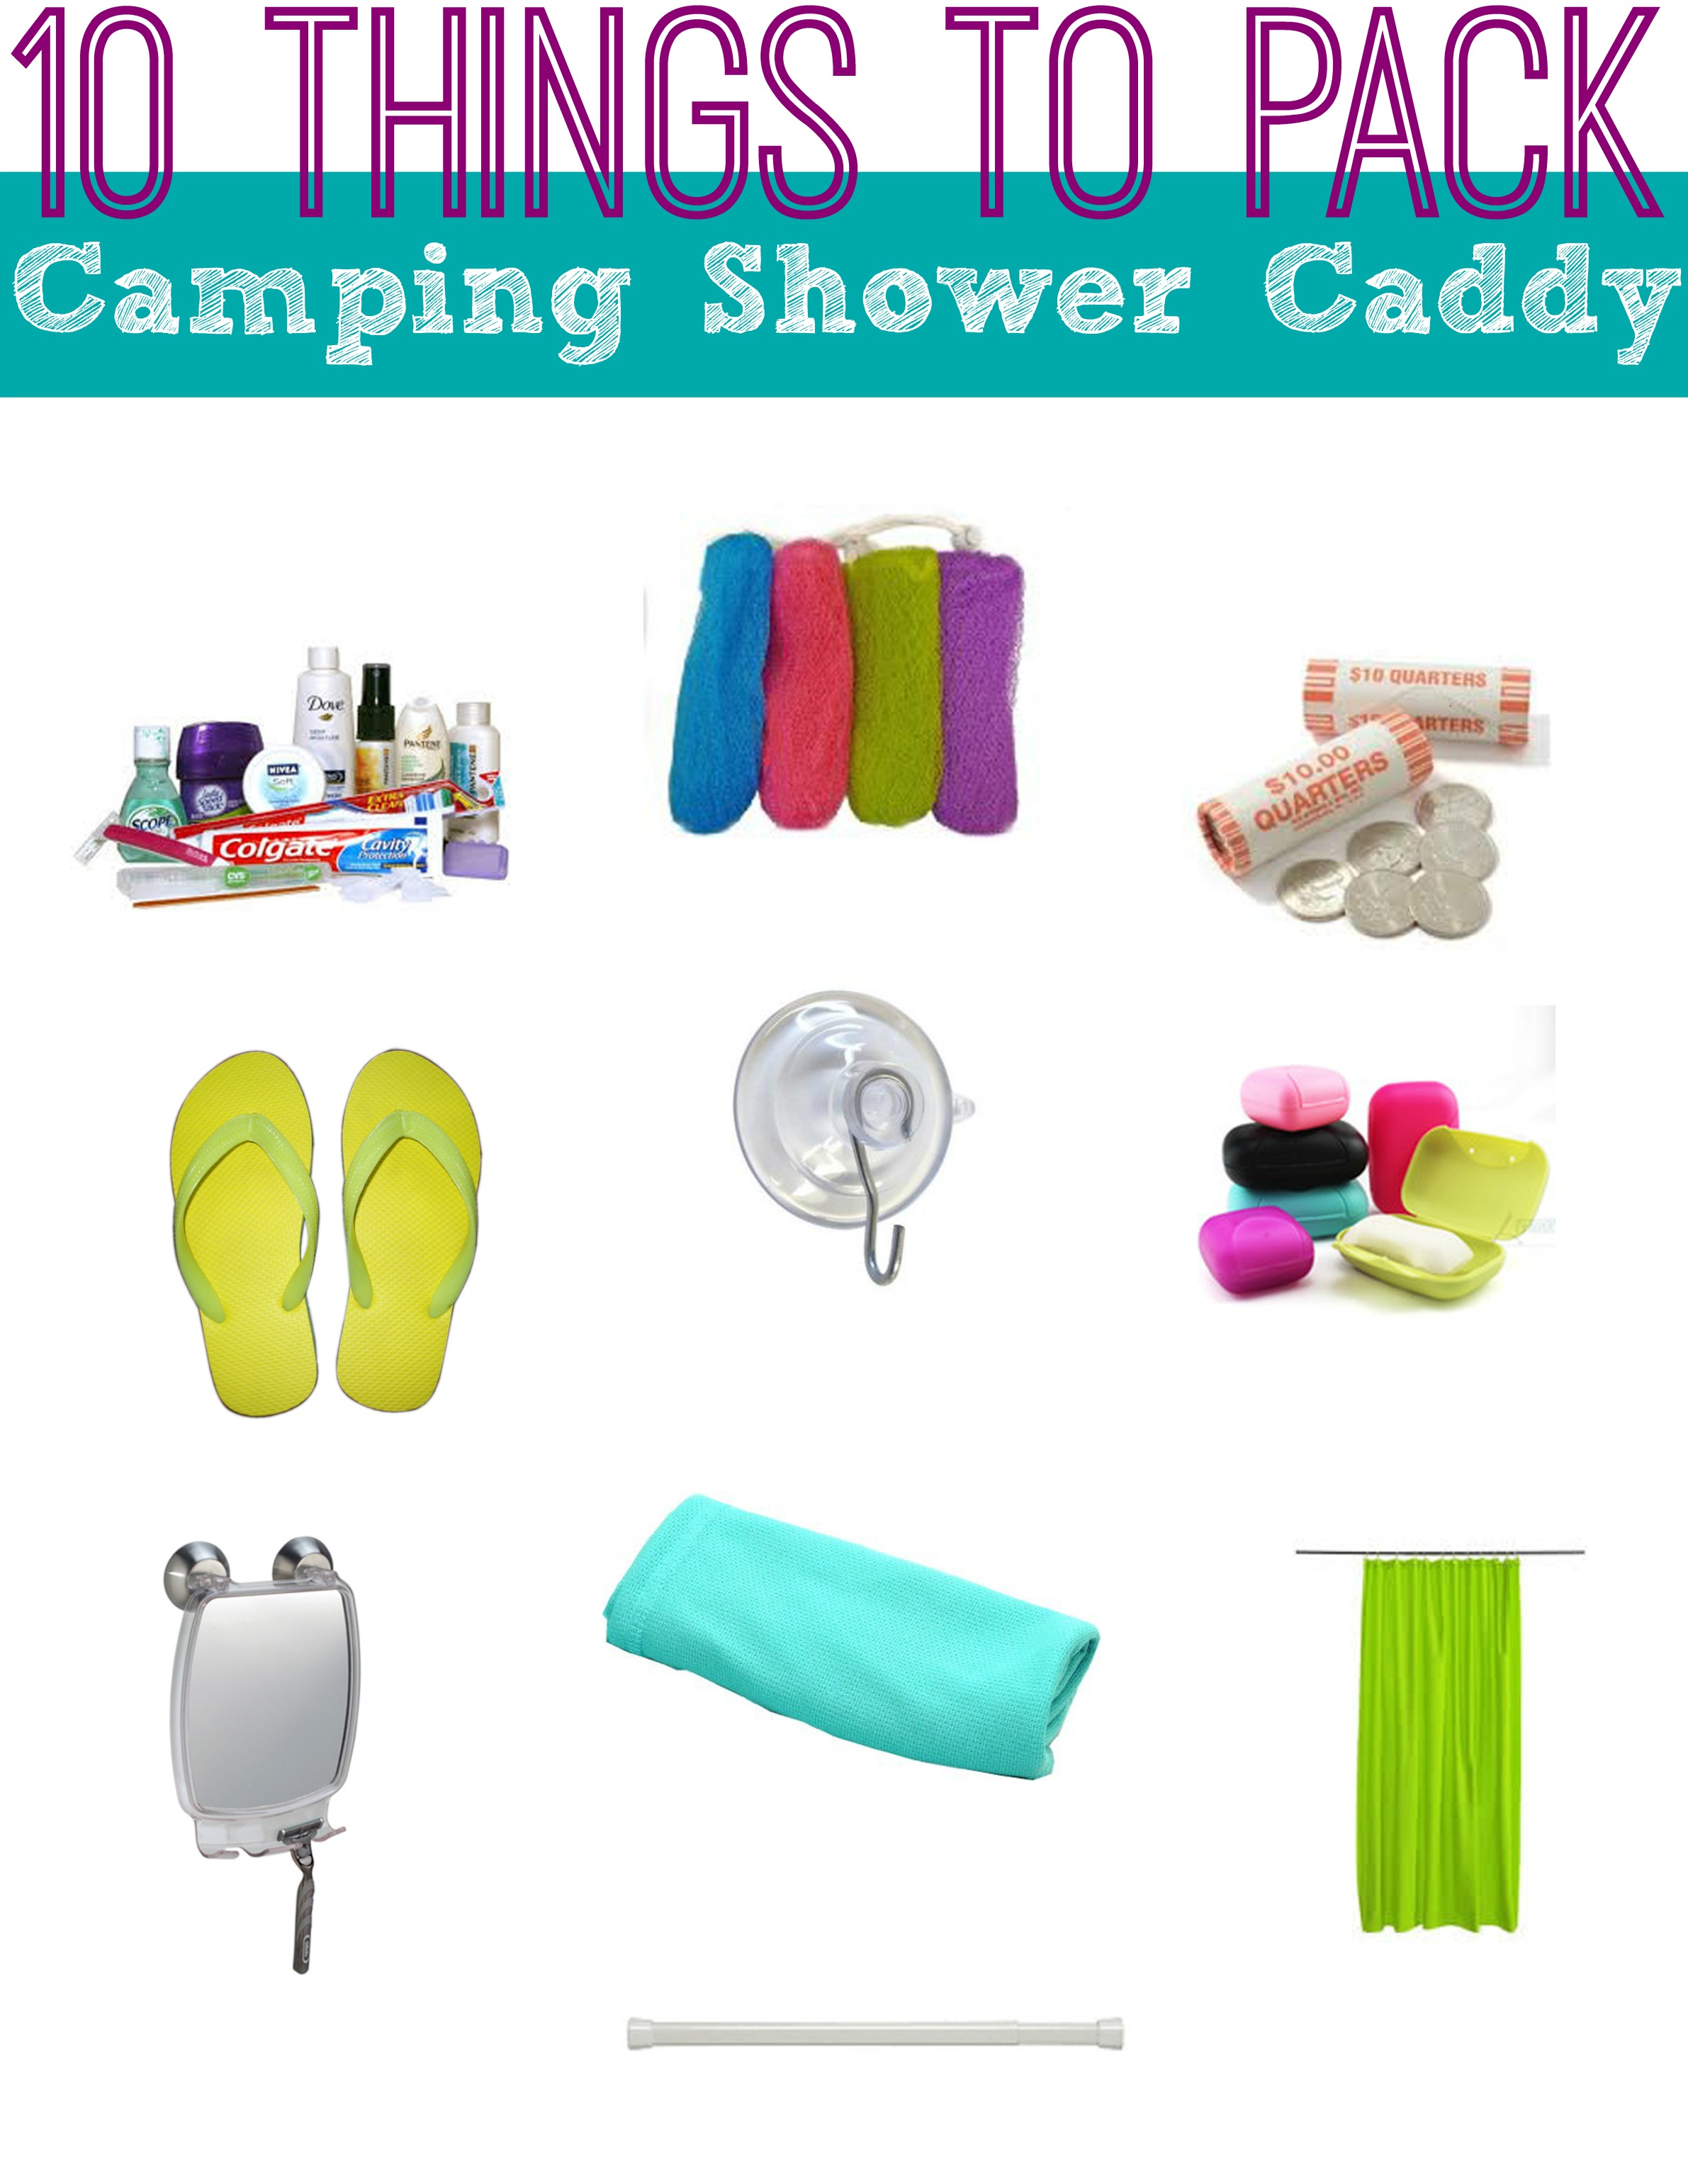 10 Things to Pack in Your Camping Shower Caddy